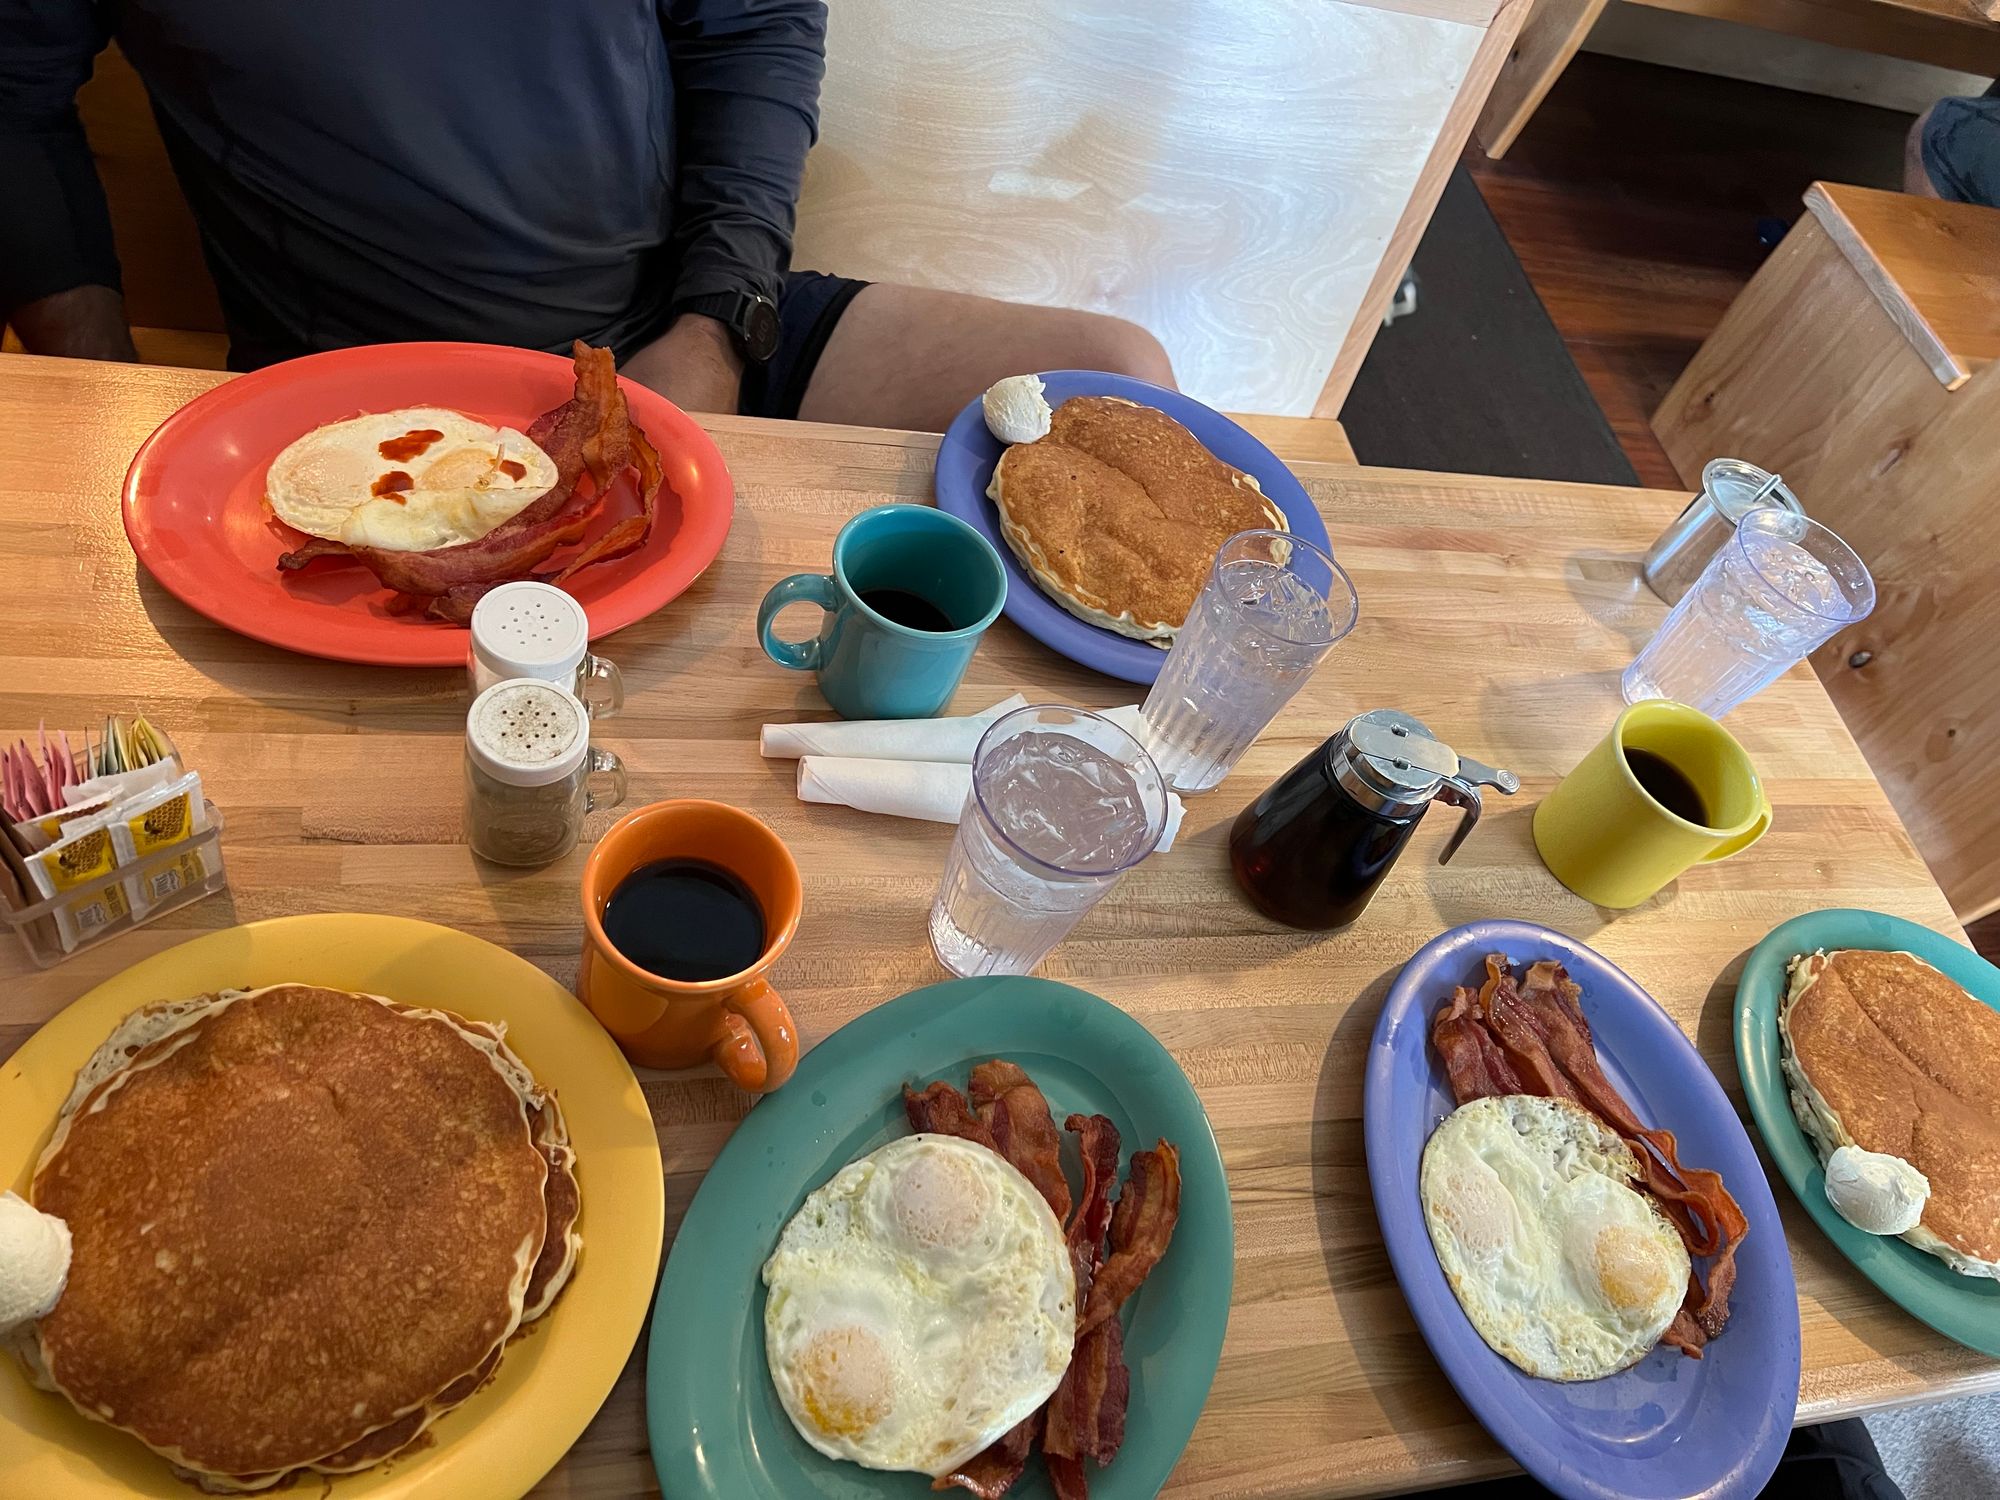 Three plates each of: pancakes, bacon, and eggs.